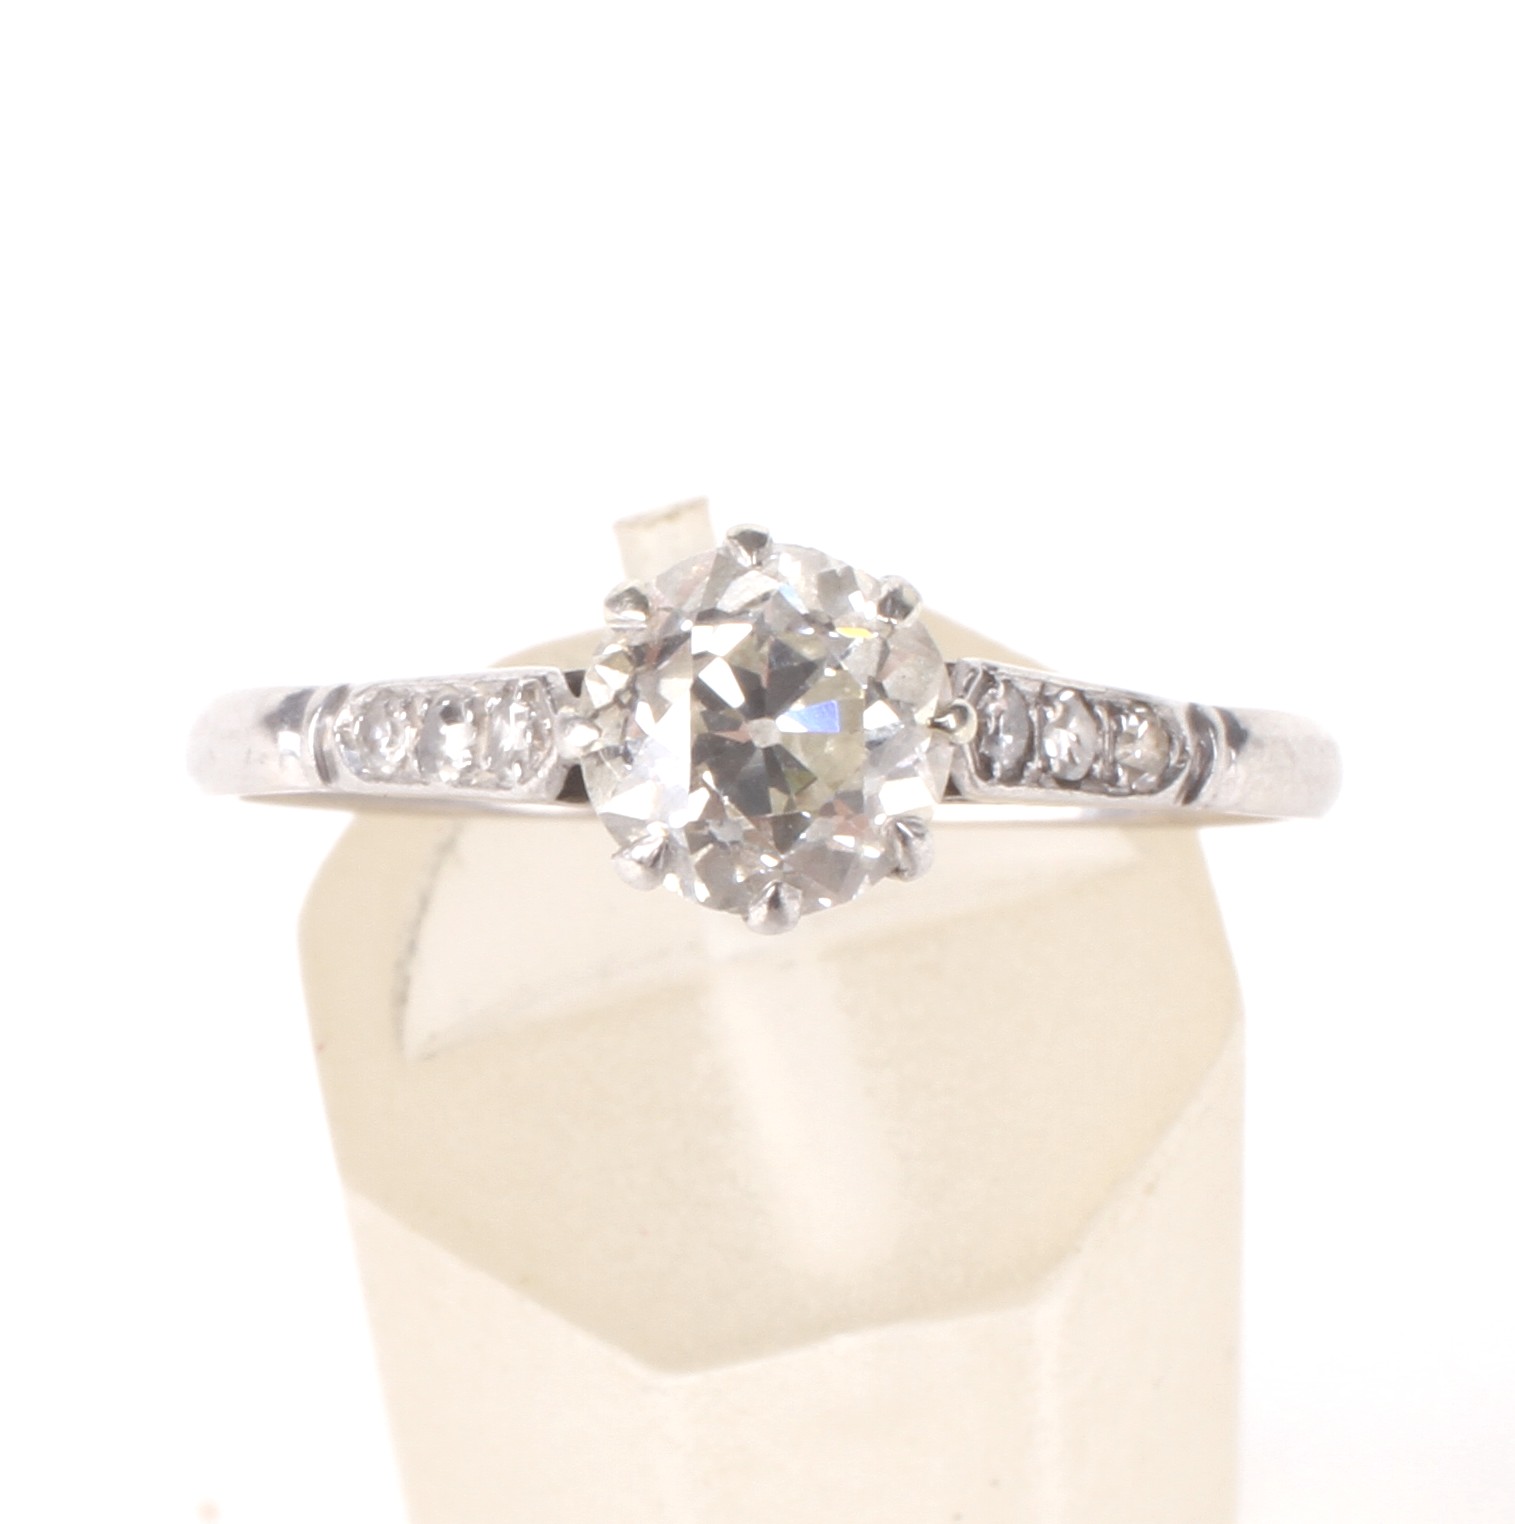 An early-mid 20th century platinum and diamond solitaire ring with small diamond shoulders. - Image 2 of 3